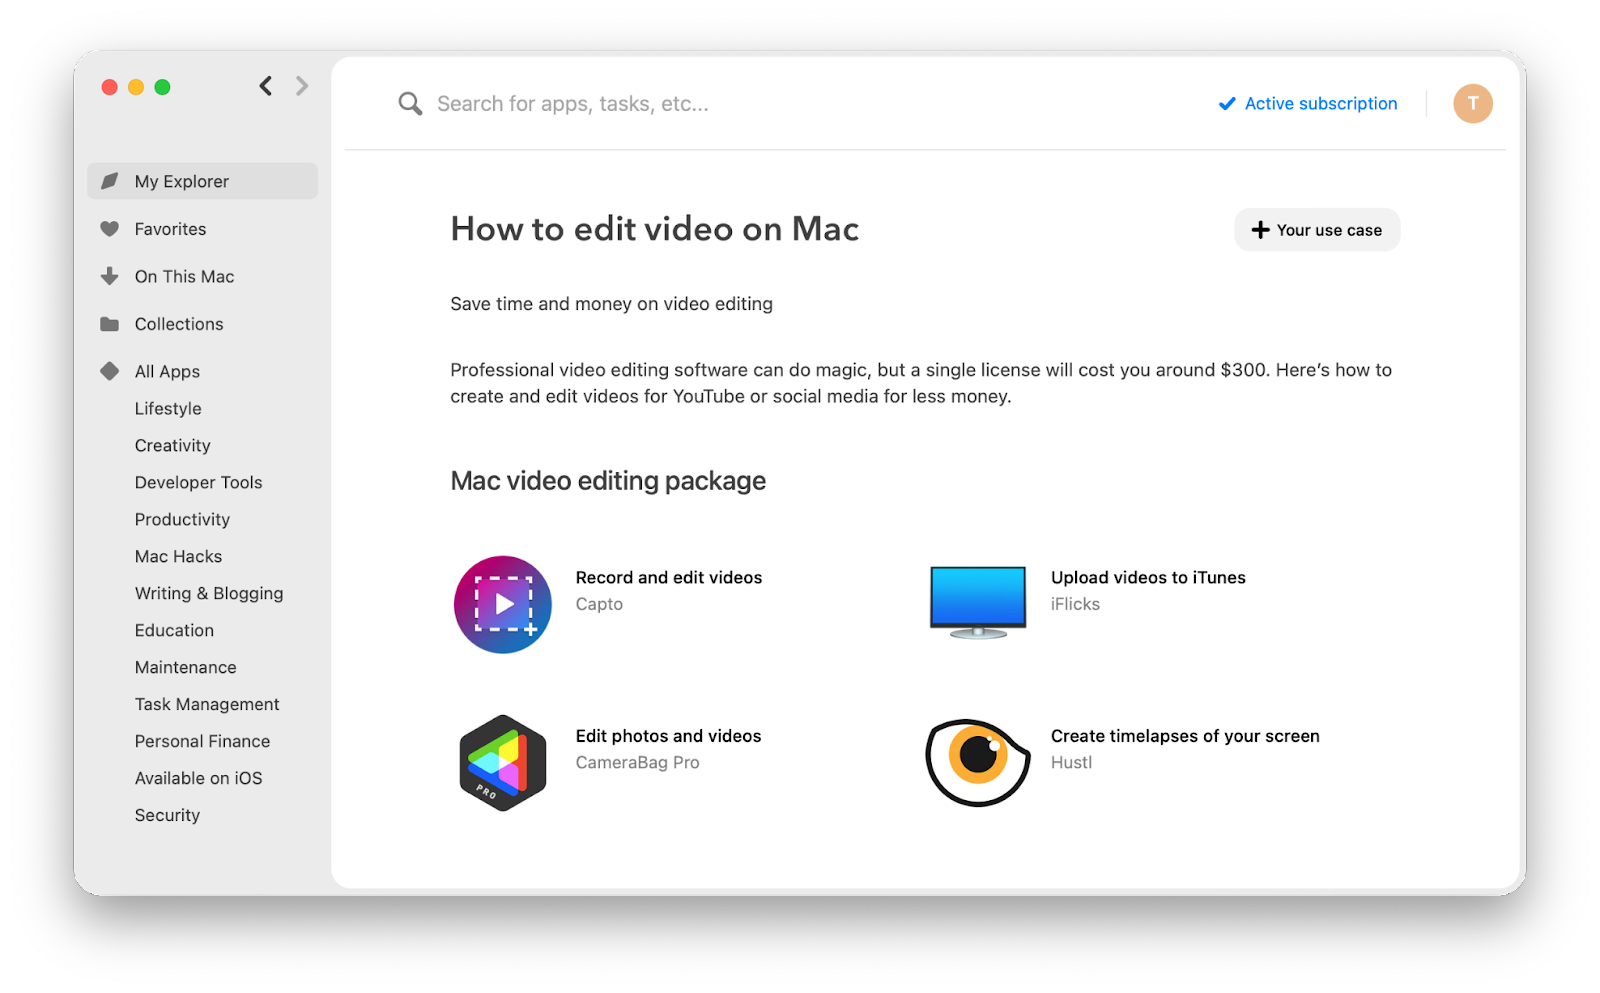 How to edit video on Mac - video editing package